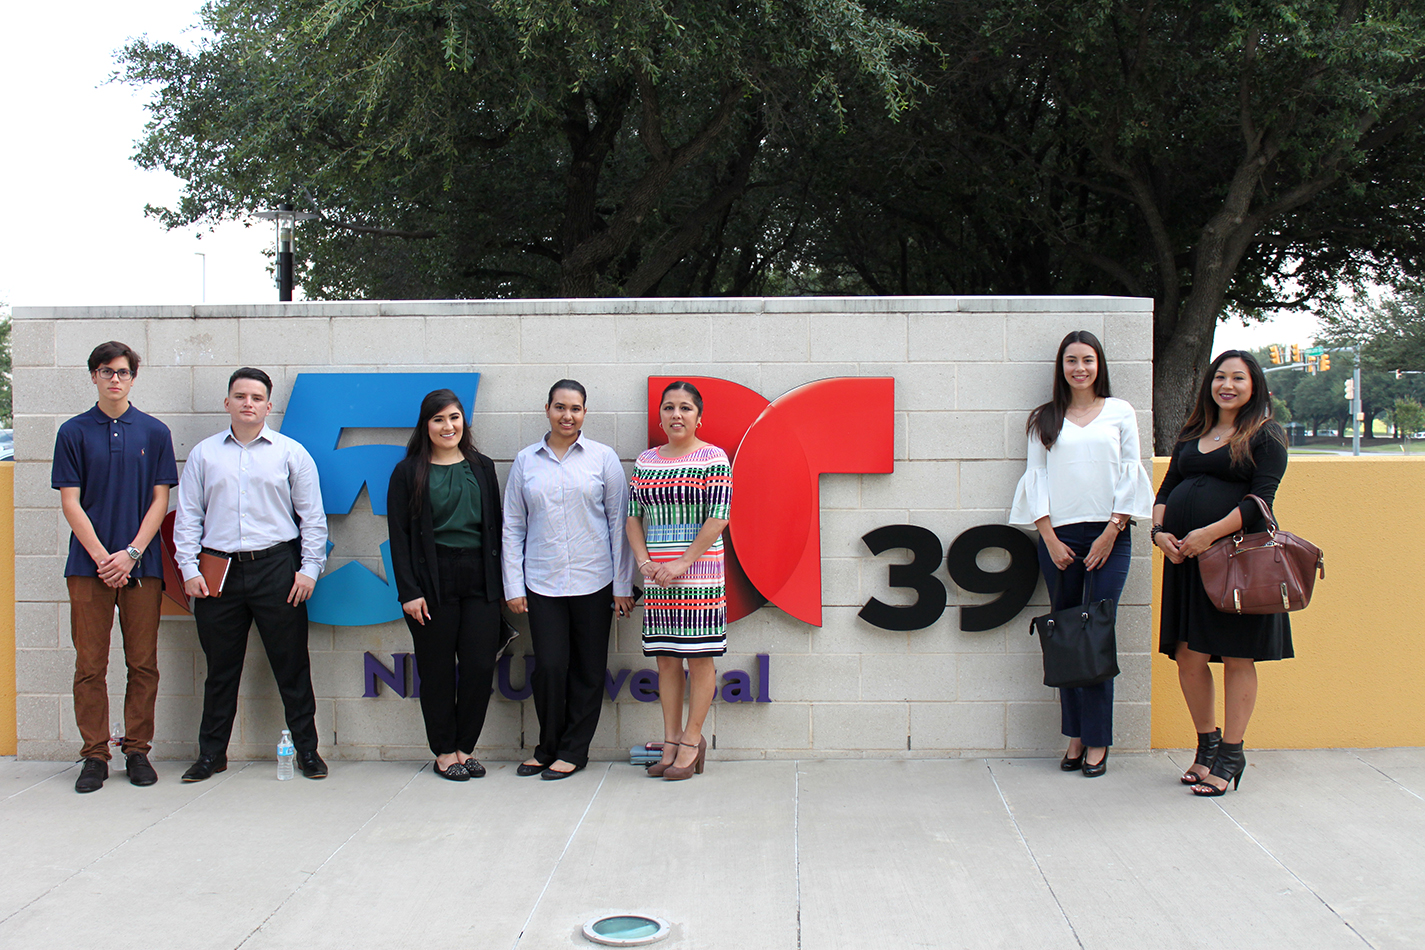 Max Orocio, Kenneth Carrasco, Tiare Gonzalez, Diana Gonzalez, Edith Mariscal, Adriana Arbelaez and Gloria Varela pose with the Telemundo 39 sign. All of these students are recipients of the network’s scholarship.